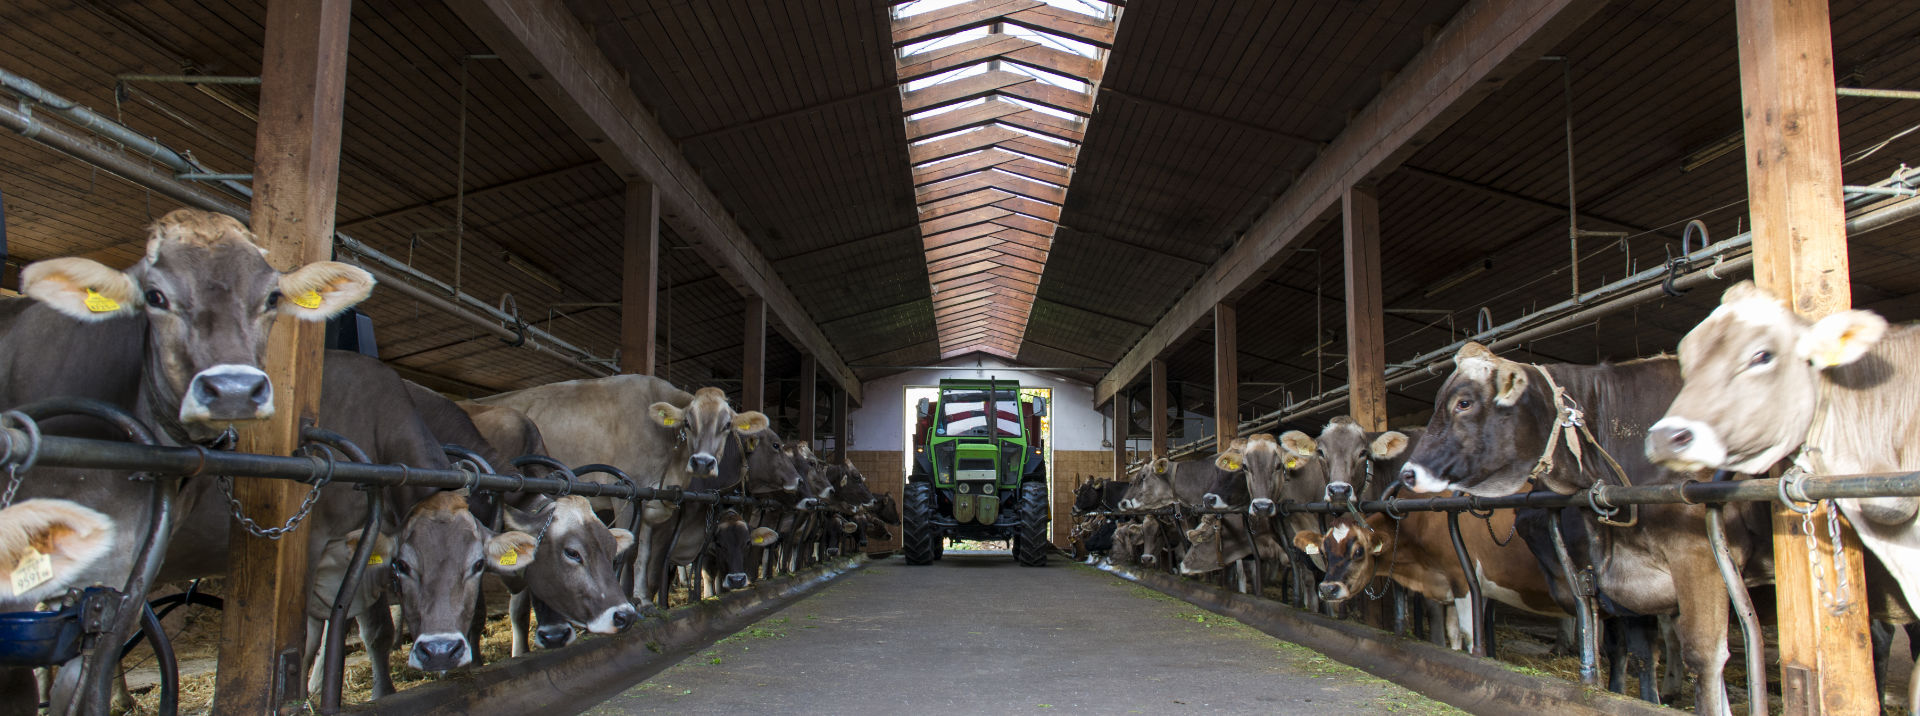 Cows in barn with tractor